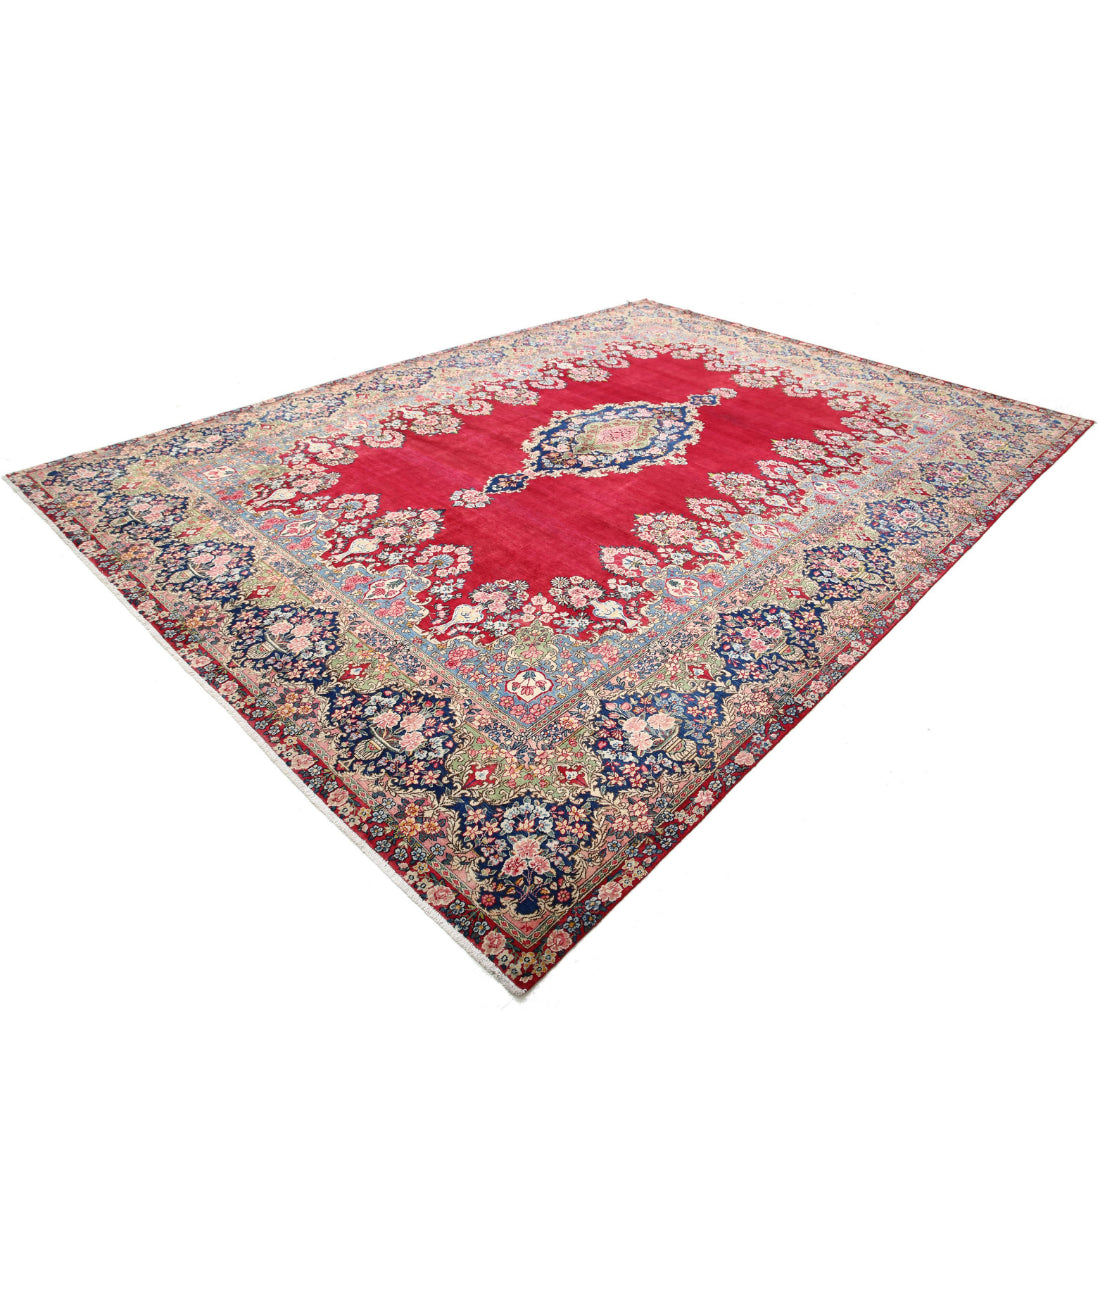 Hand Knotted Persian Kerman Wool Rug - 9'11'' x 13'9'' 9'11'' x 13'9'' (298 X 413) / Red / Blue